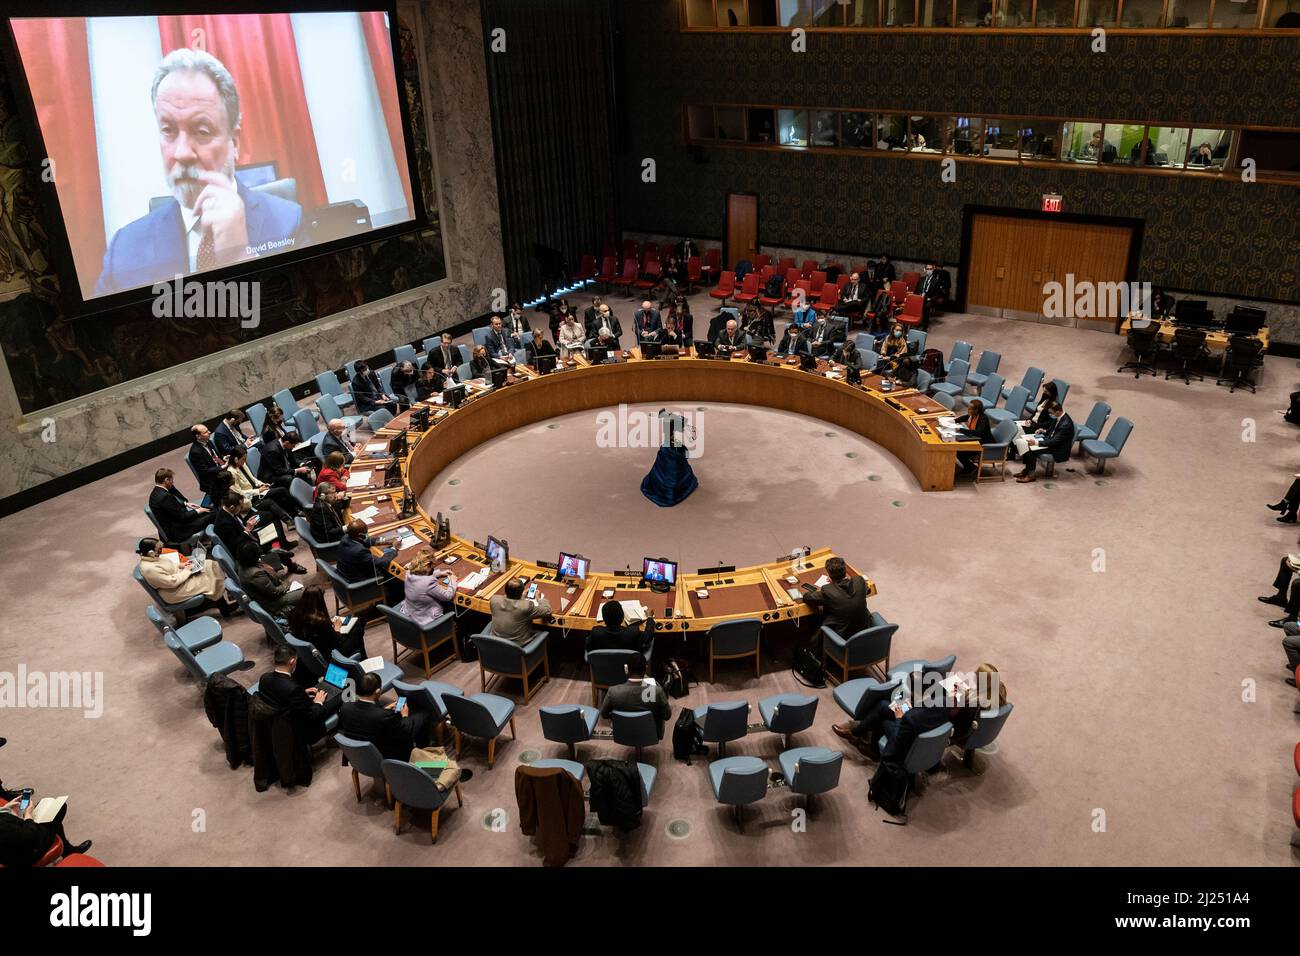 New York, NY - March 29, 2022: David Beasley, Executive Director of the United Nations World Food Programme, briefs via weblink the Security Council meeting on the situation in Ukraine at UN Headquarters Stock Photo